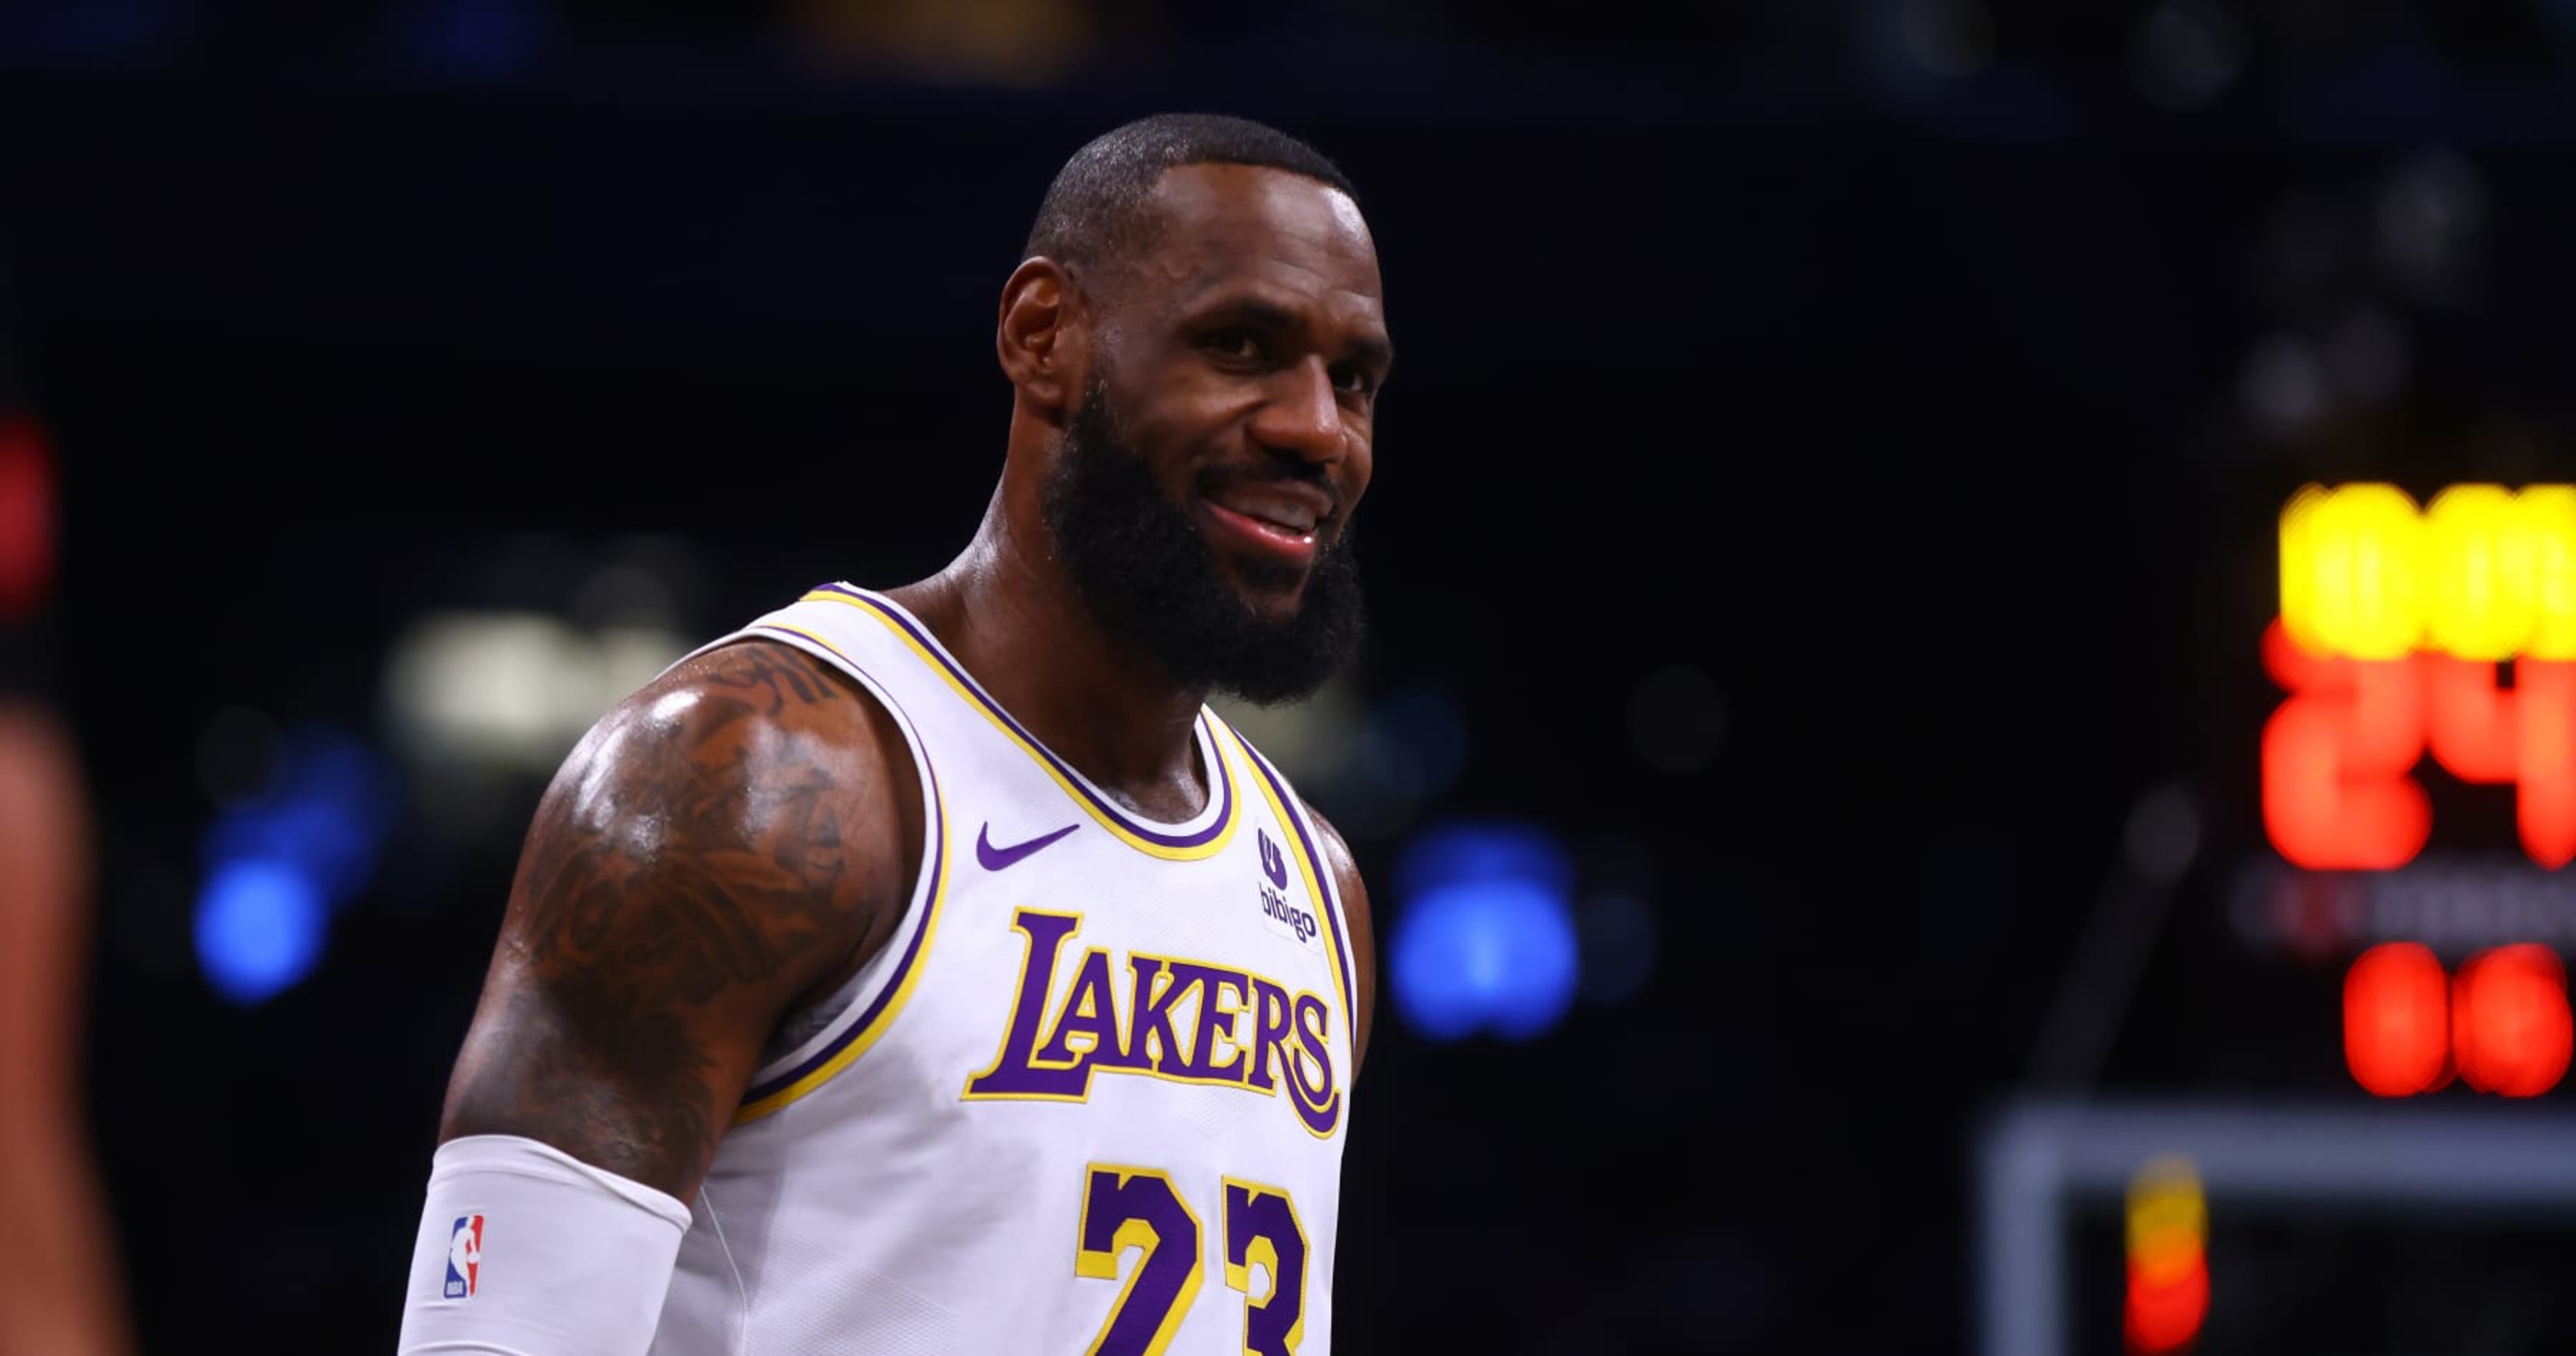 Shams: Lakers' LeBron James Expected to Play 1-2 More Years by NBA Insiders